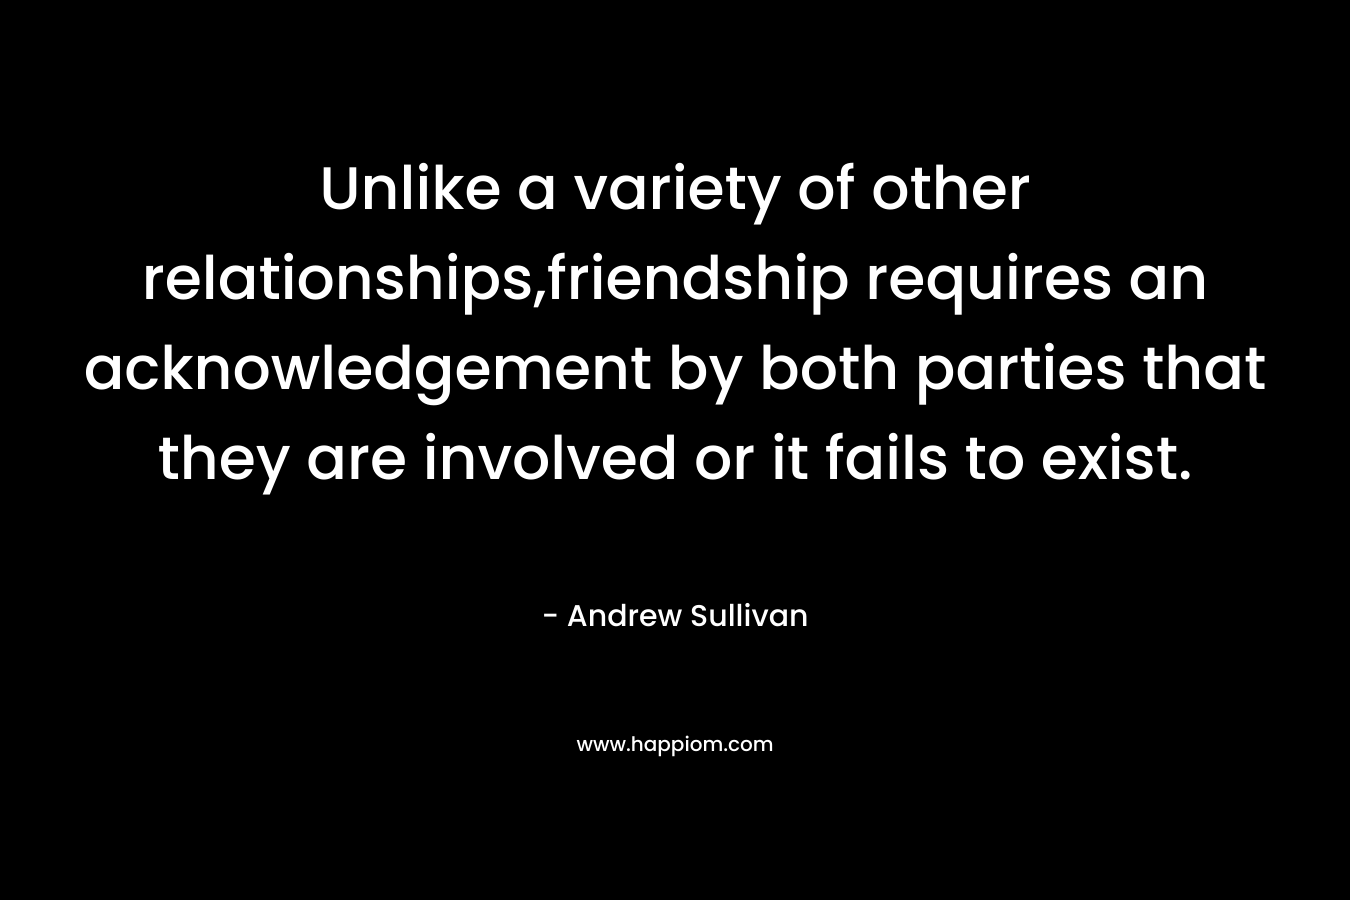 Unlike a variety of other relationships,friendship requires an acknowledgement by both parties that they are involved or it fails to exist.